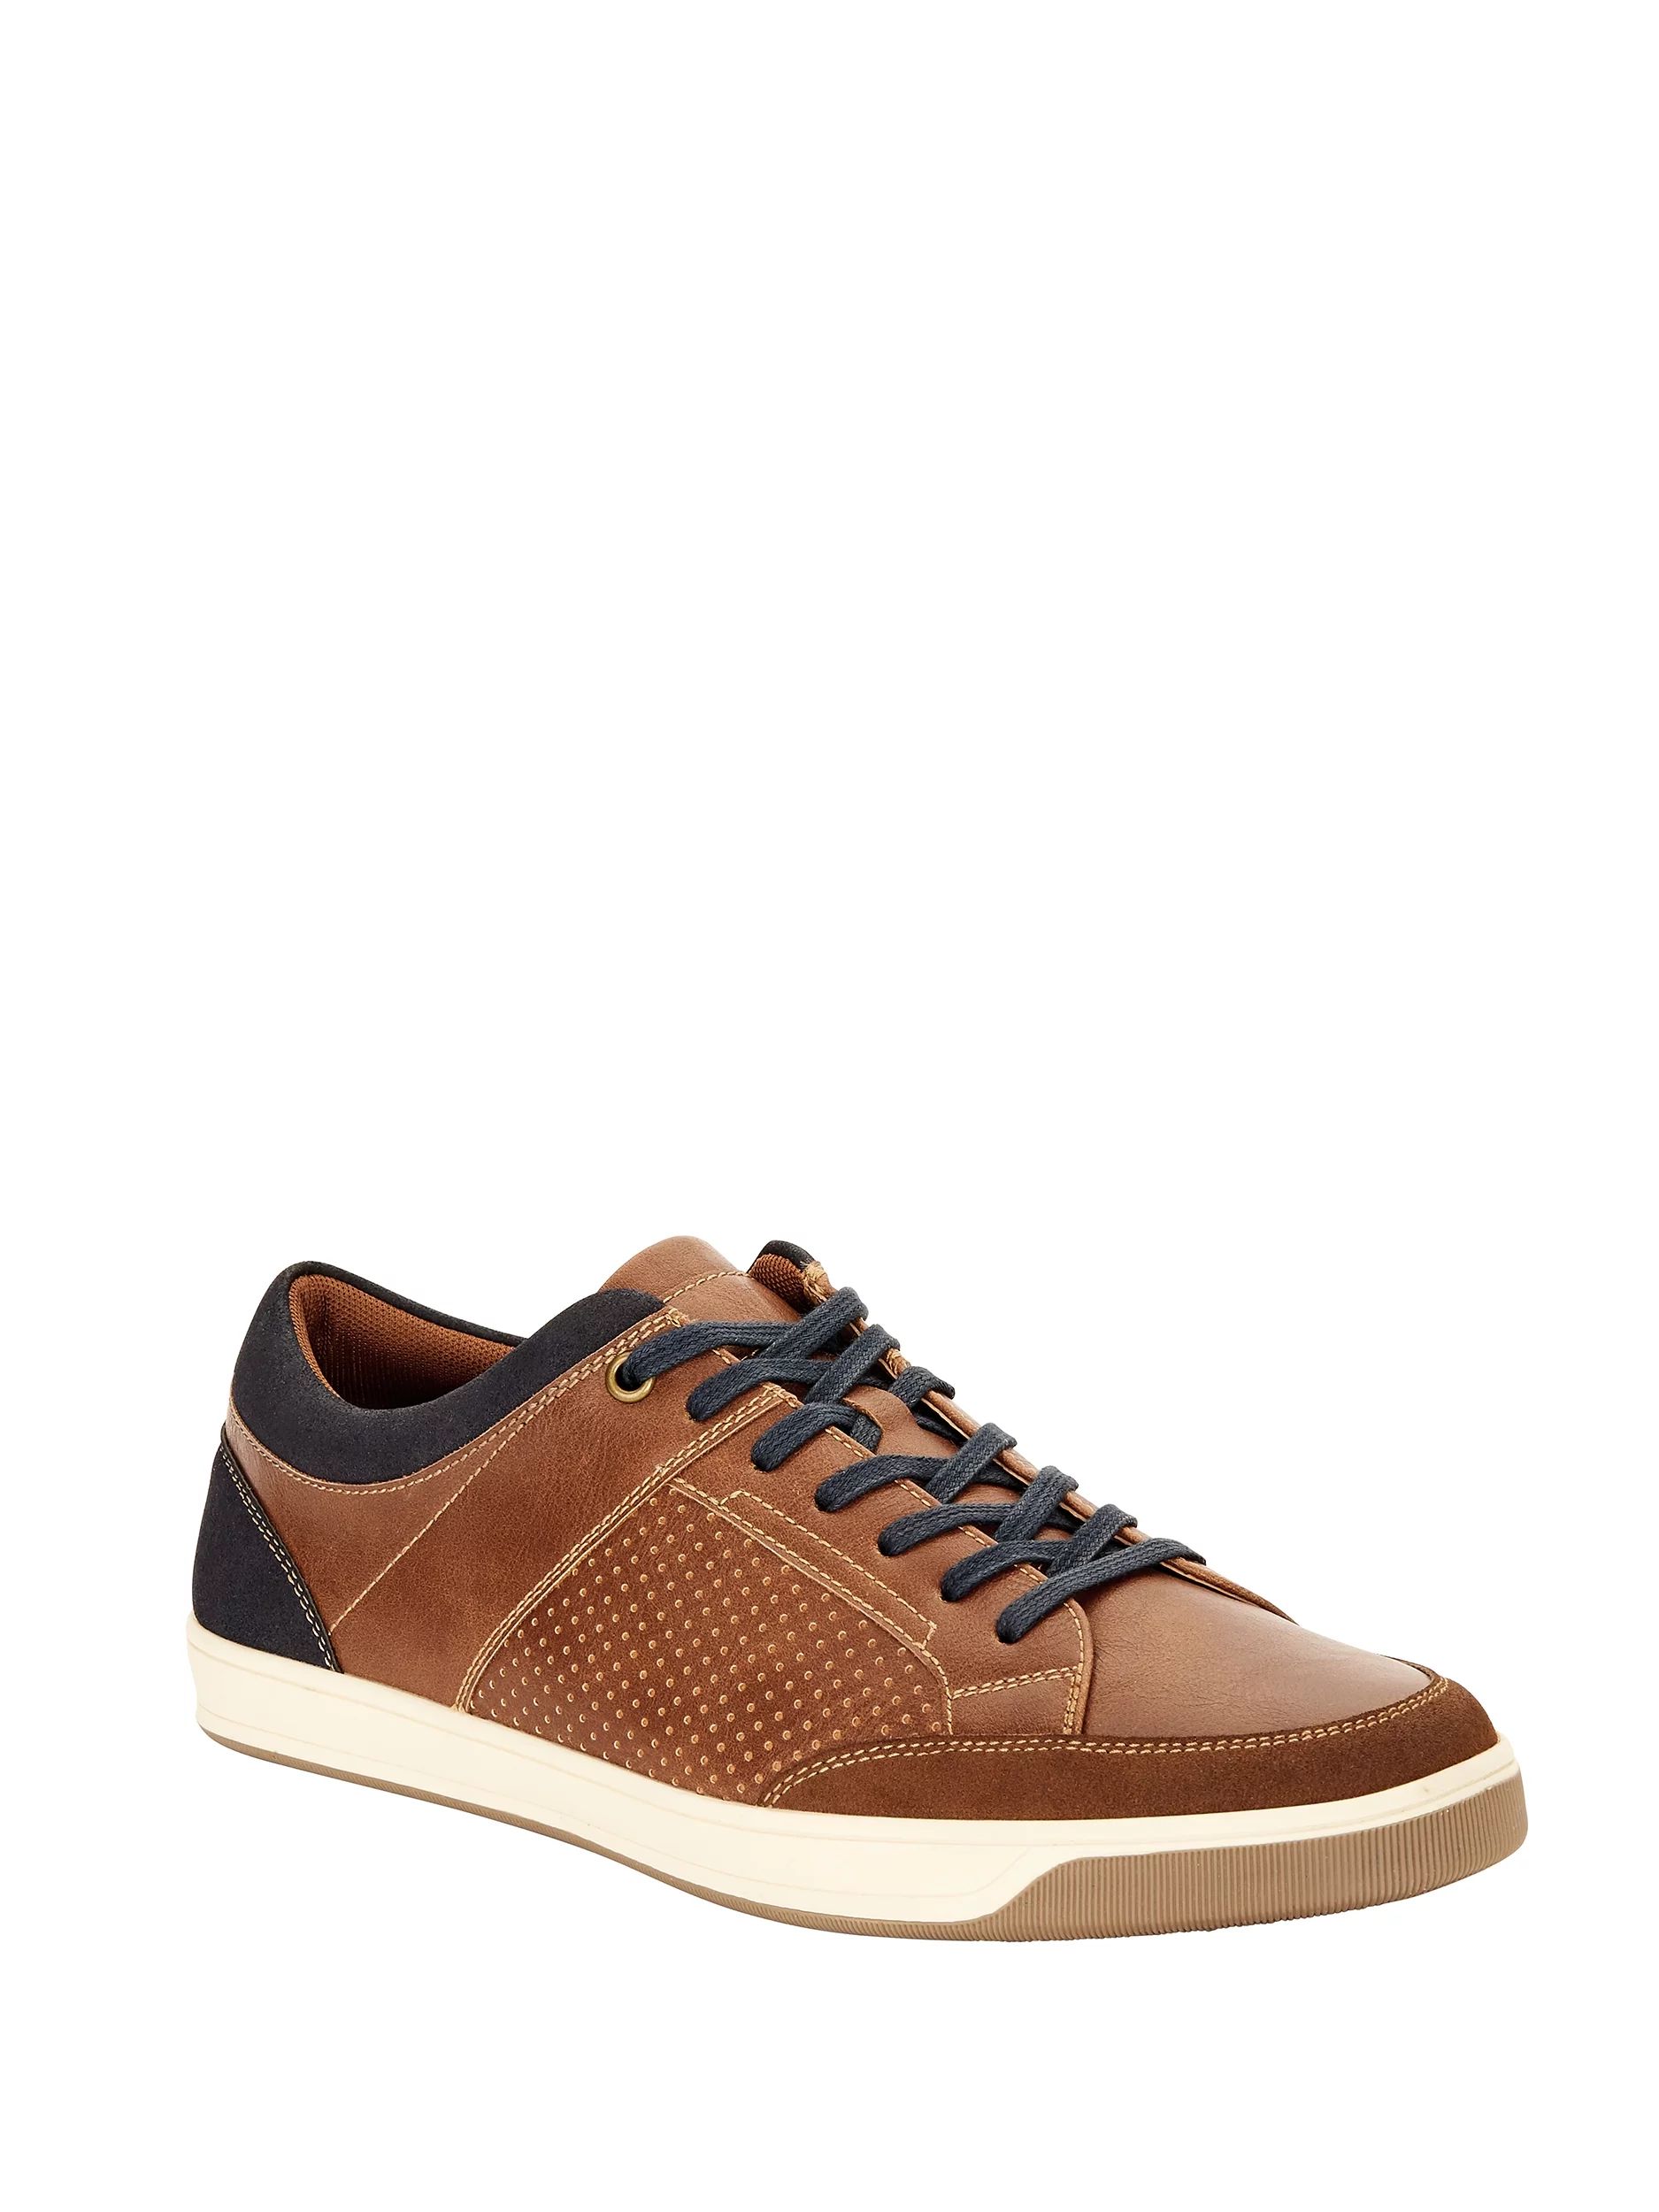 George Men's Connor Casual Lace Up Sneakers | Walmart (US)